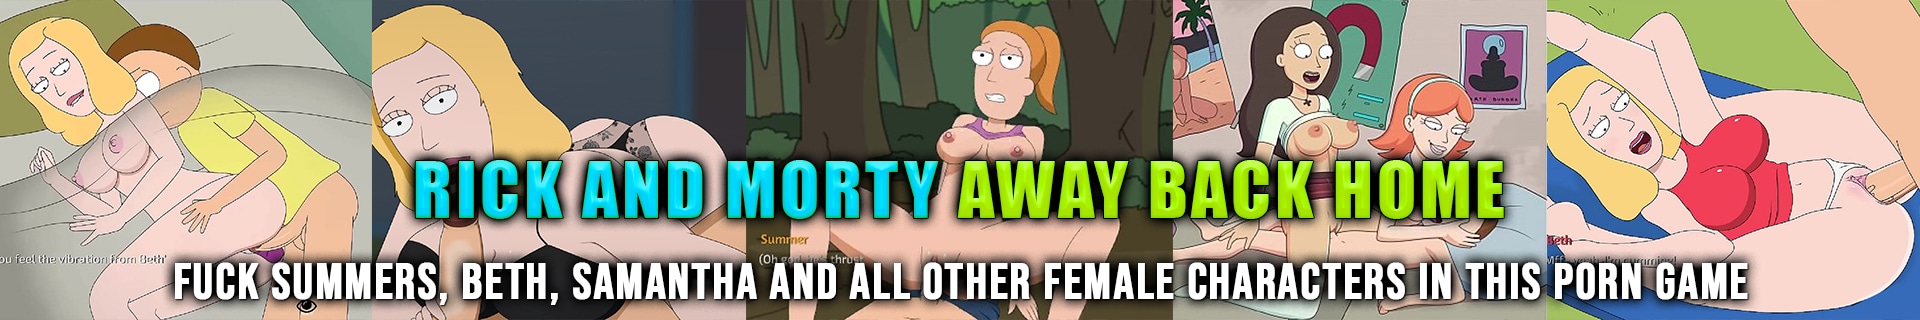 Rick and morty porn games Is it normal for women to watch porn